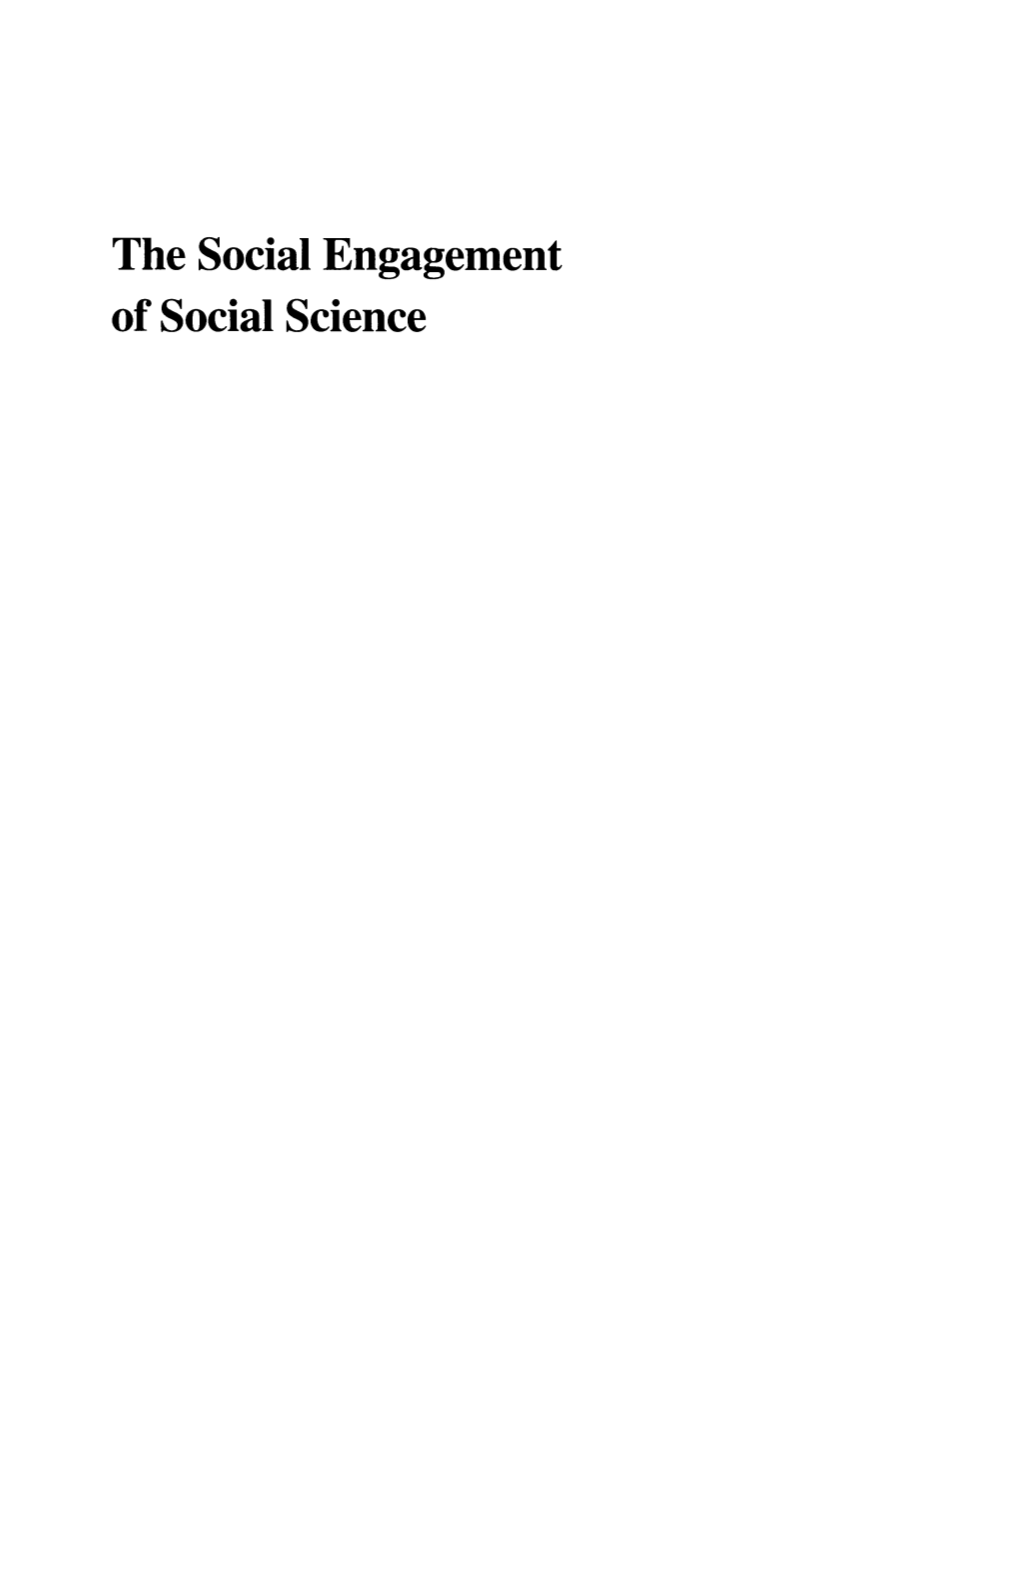 The Social Engagement of Social Science a Series in Three Volumes